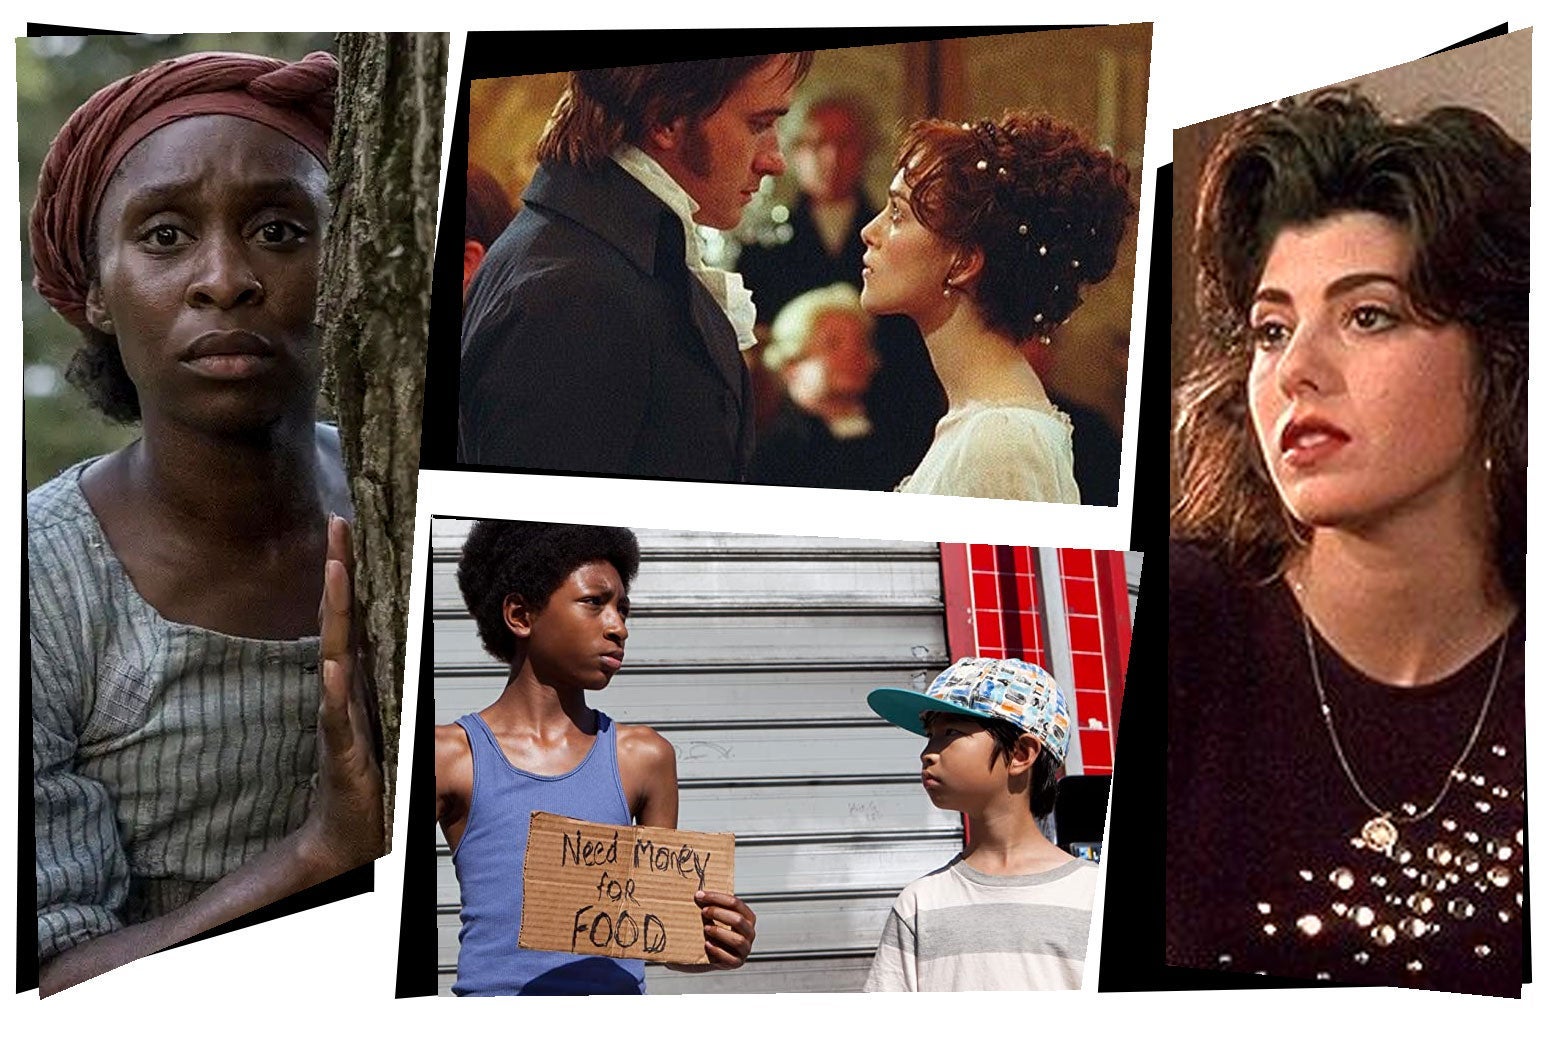 Stills from the movies in a mosaic-style collage showing Cynthia Erivo as Harriet Tubman, Marisa Tomei in My Cousin Vinny, Keira Knightley in Pride & Prejudice, and the young stars of Mister and Pete.